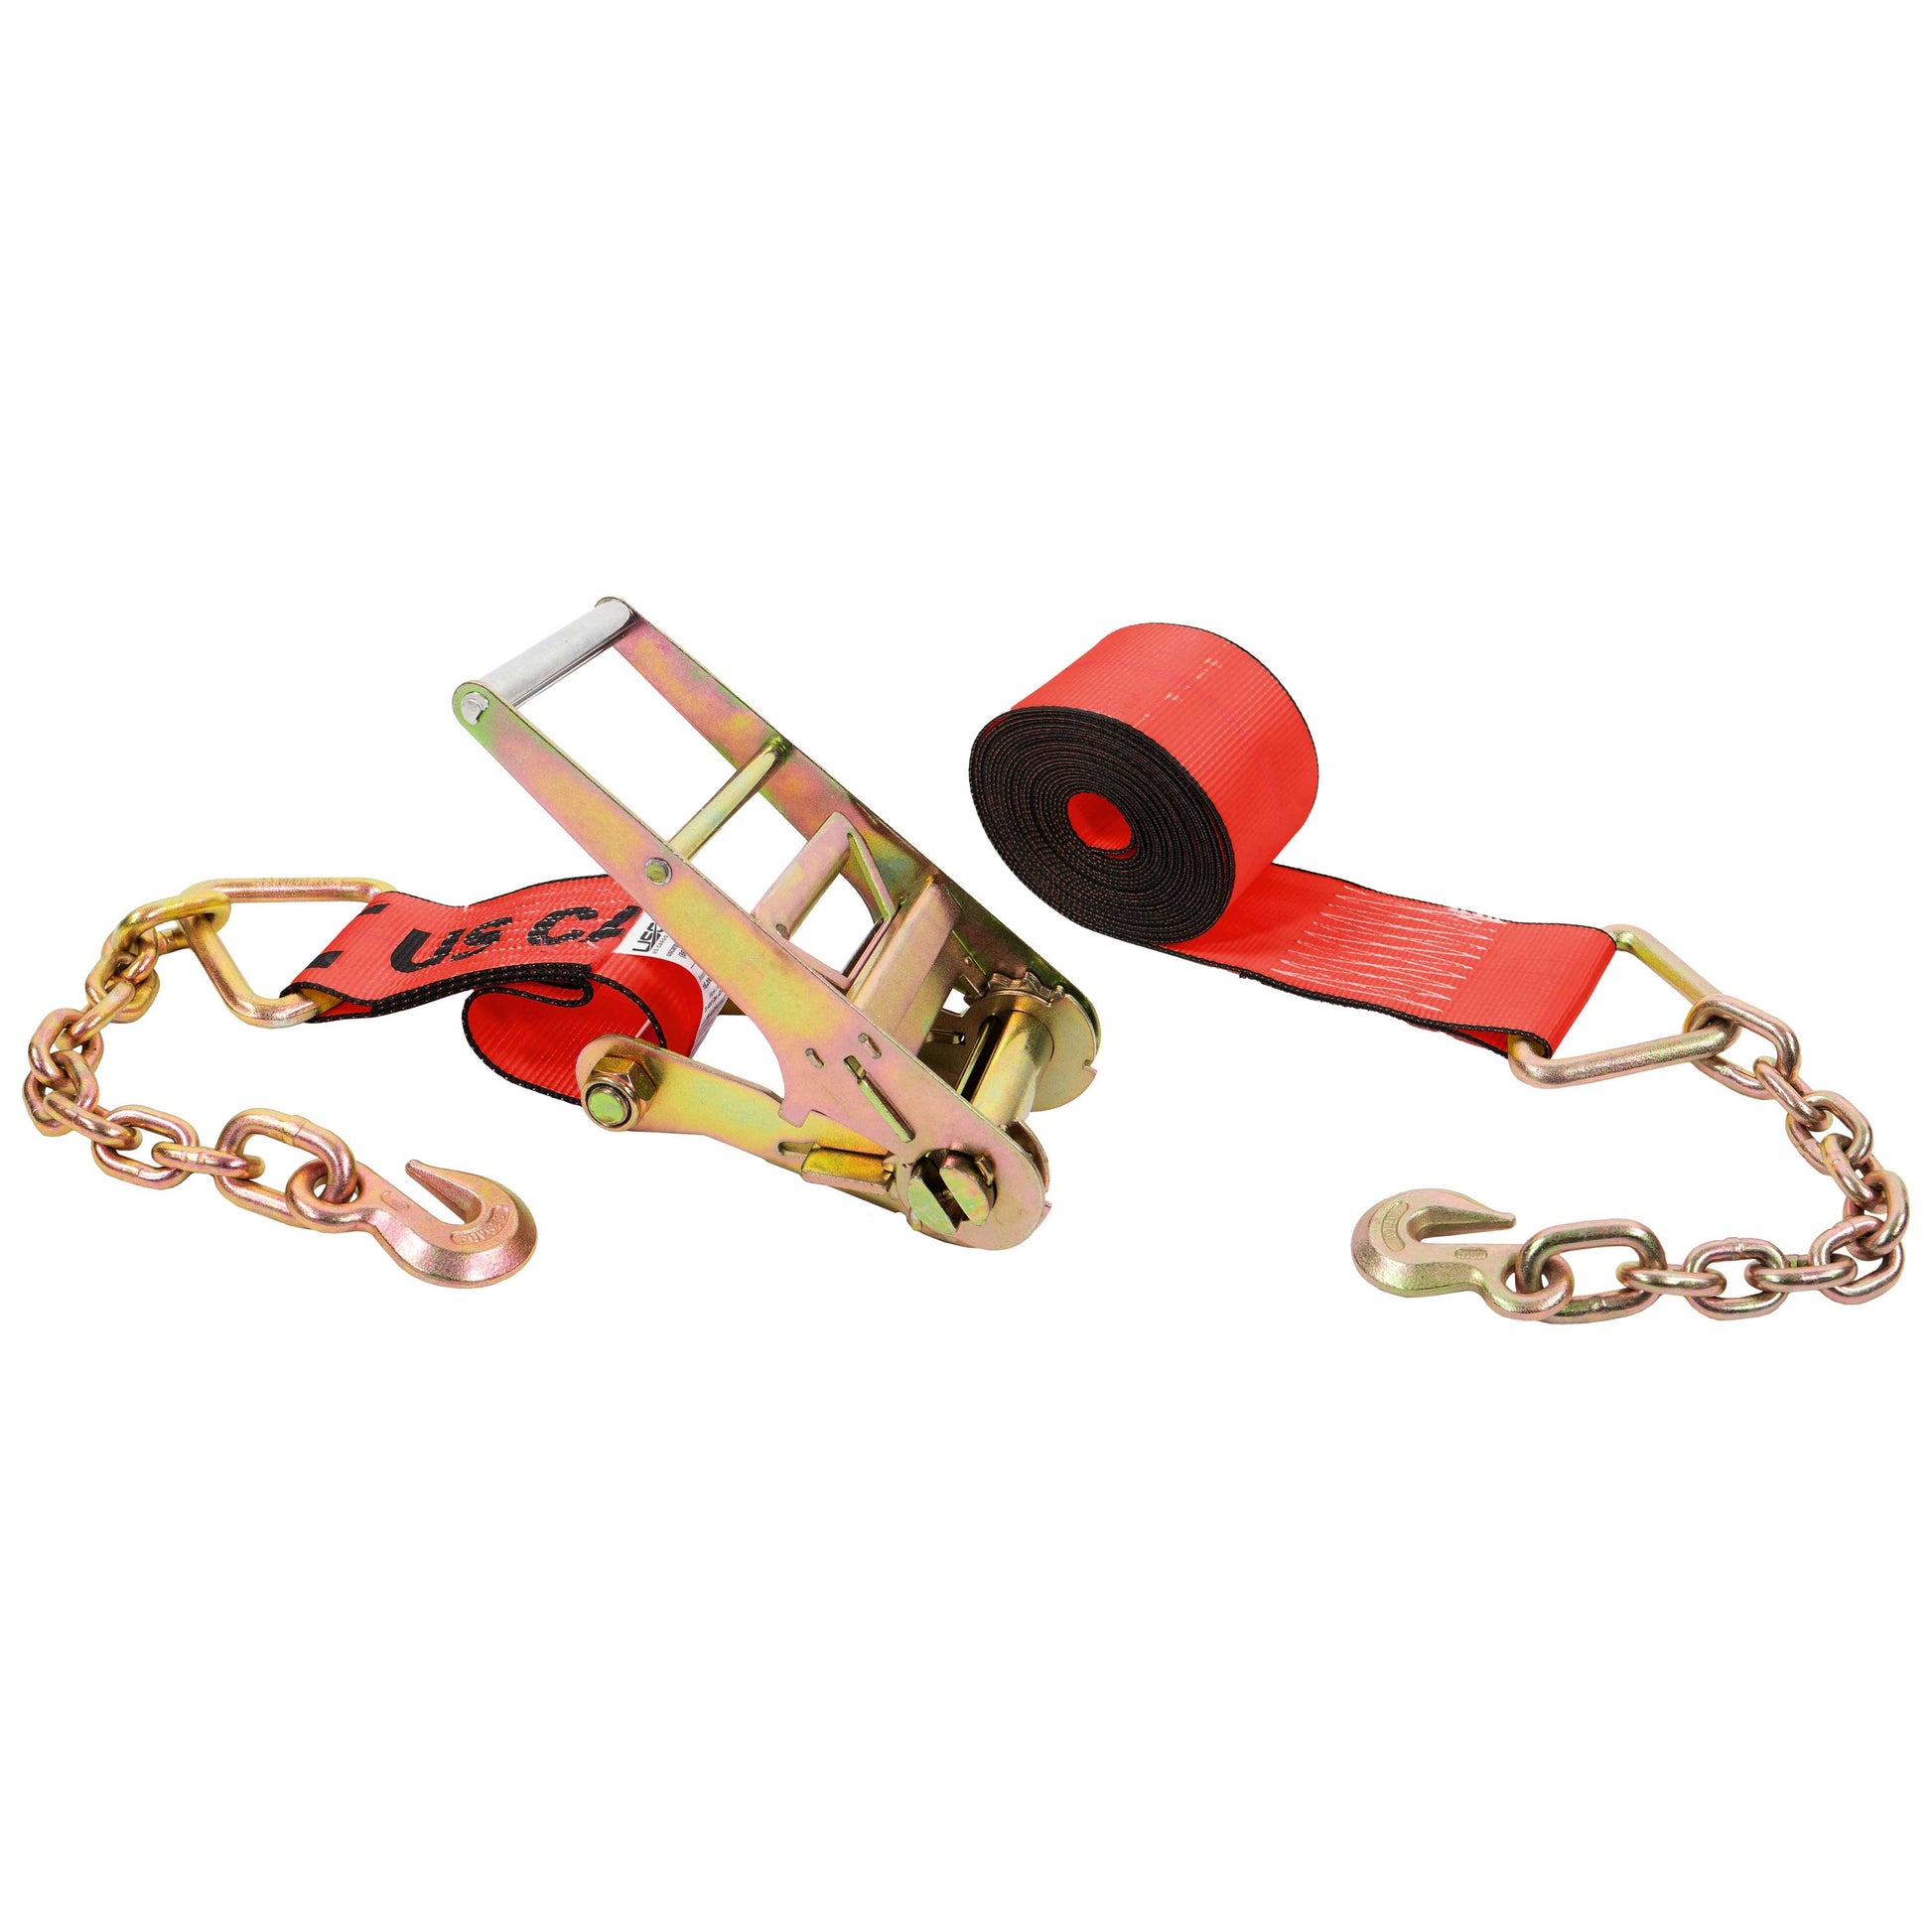 20' 4" heavy-duty red chain extension ratchet strap